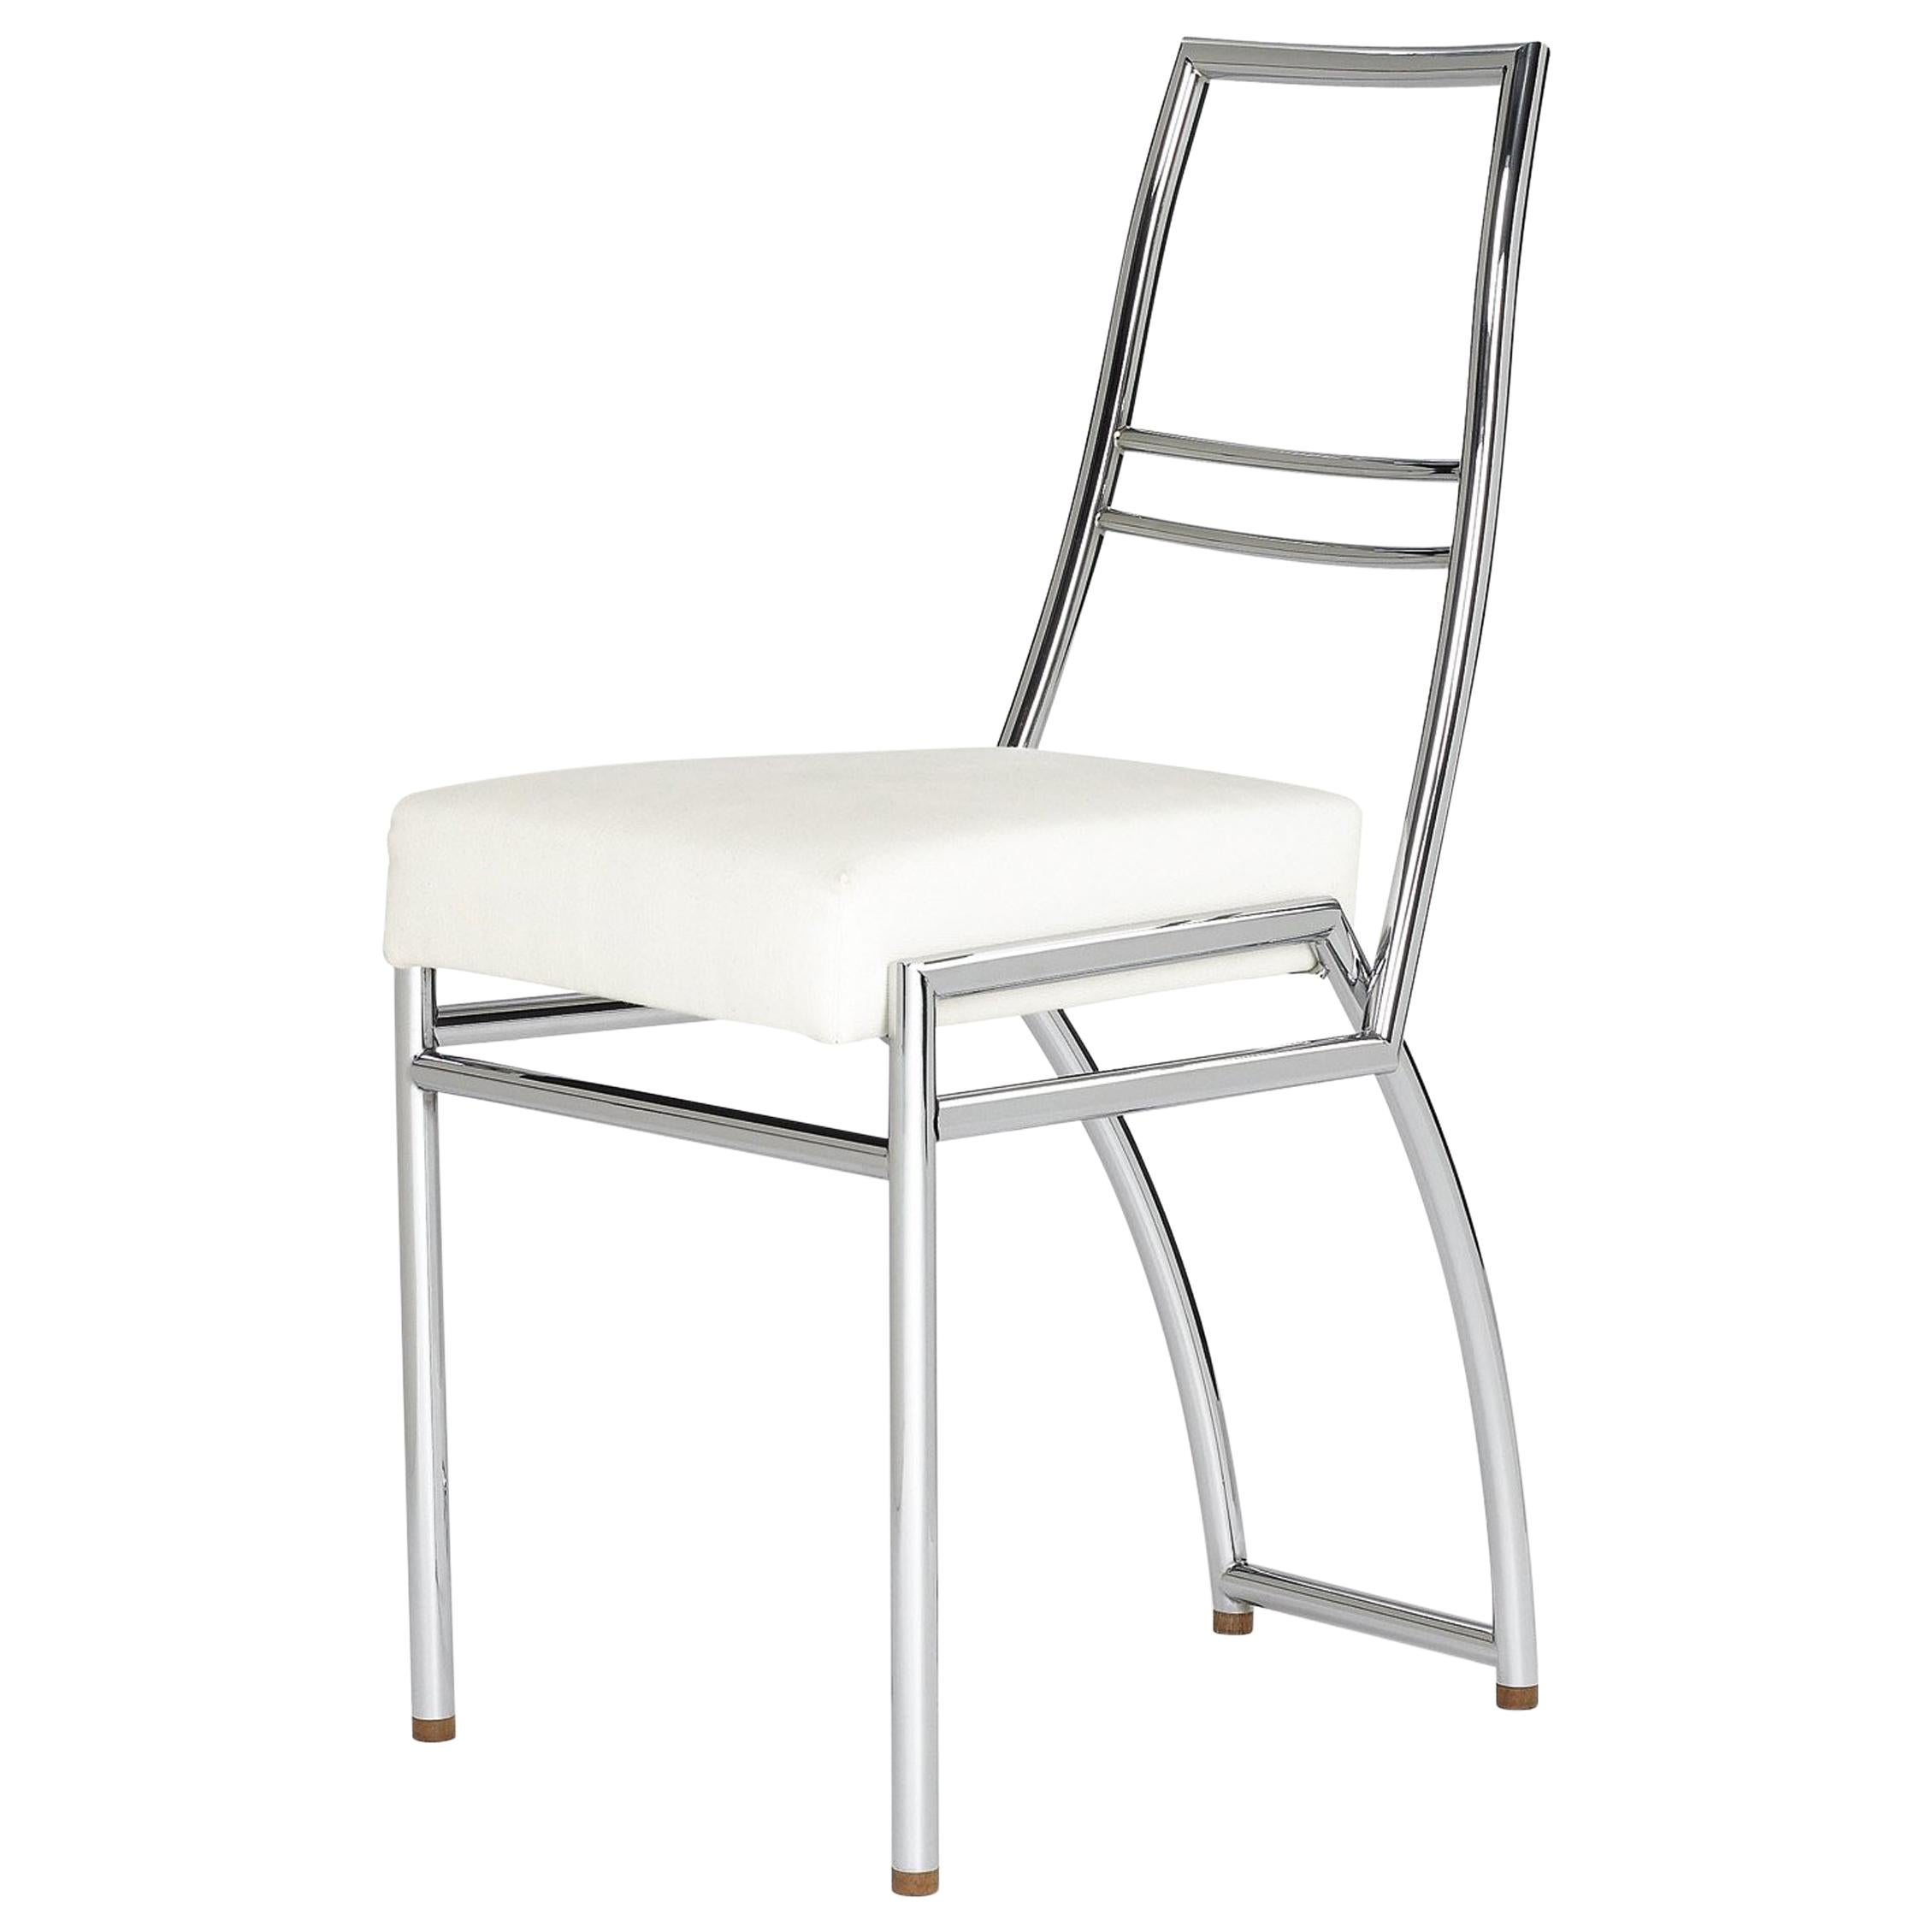 ClassiCon Aixia Chair in White by Eileen Gray